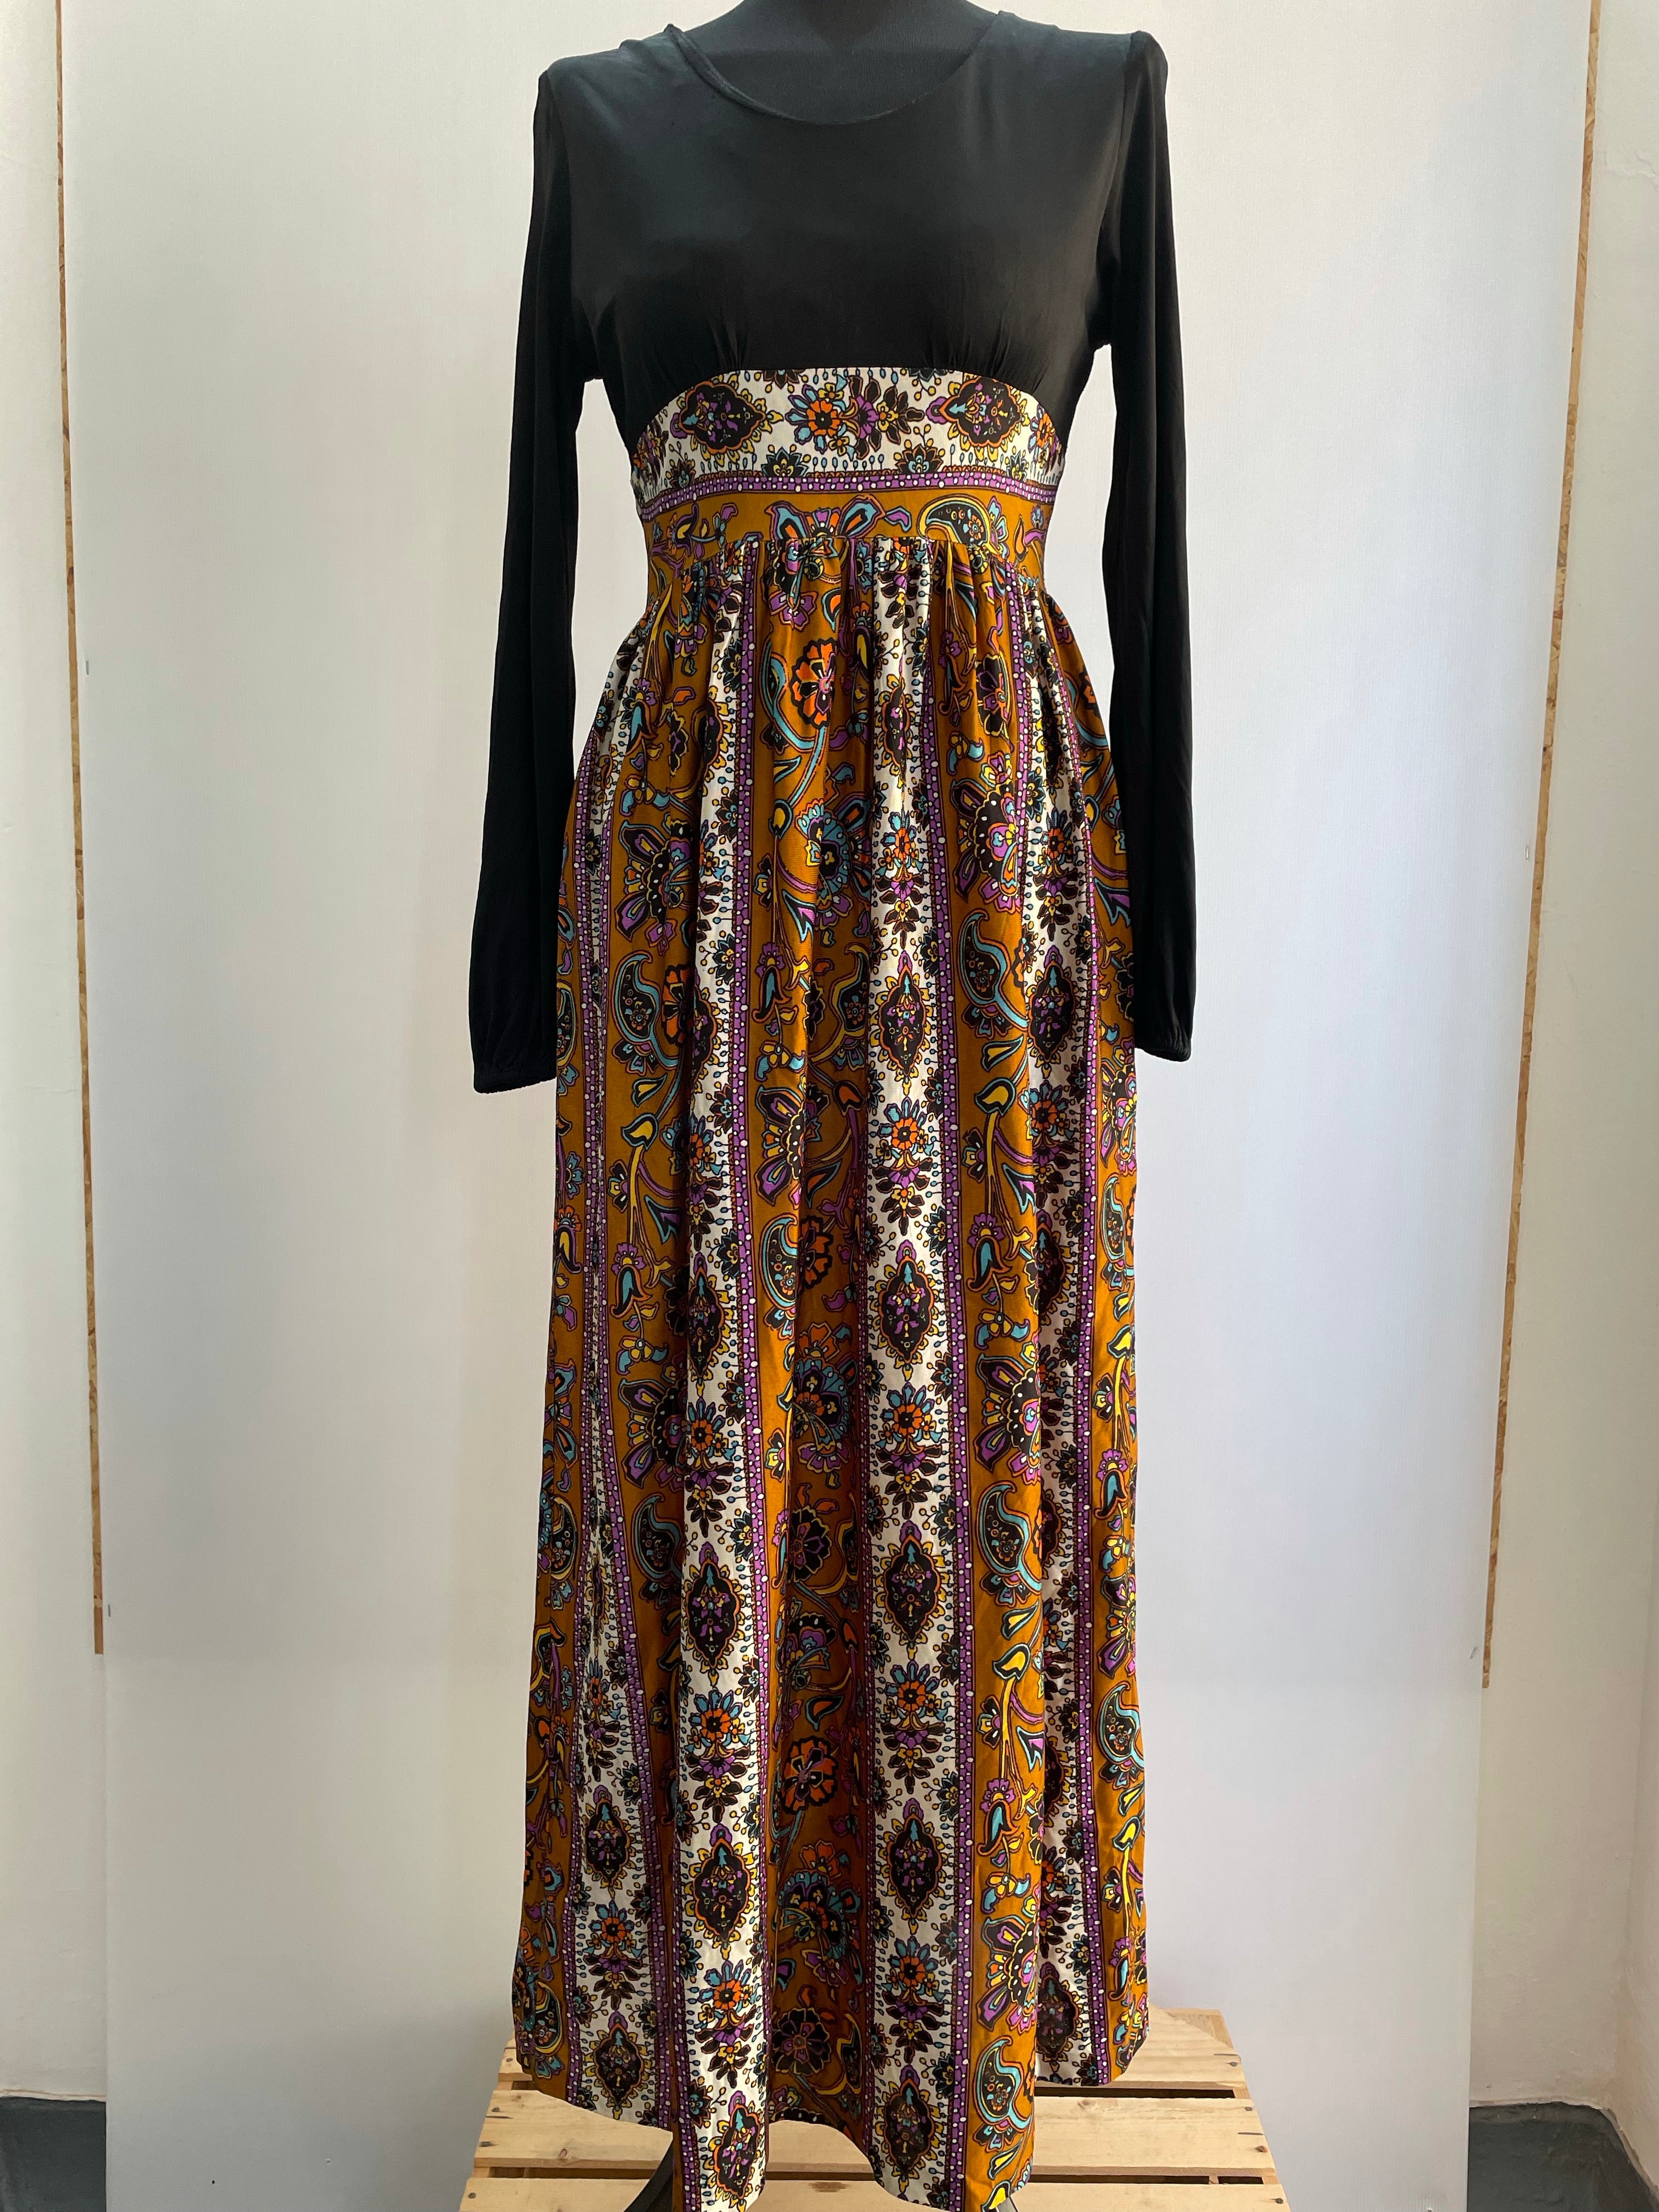 1970s Long Sleeve Ethnic Print Fitted Maxi Dress - Size UK 8